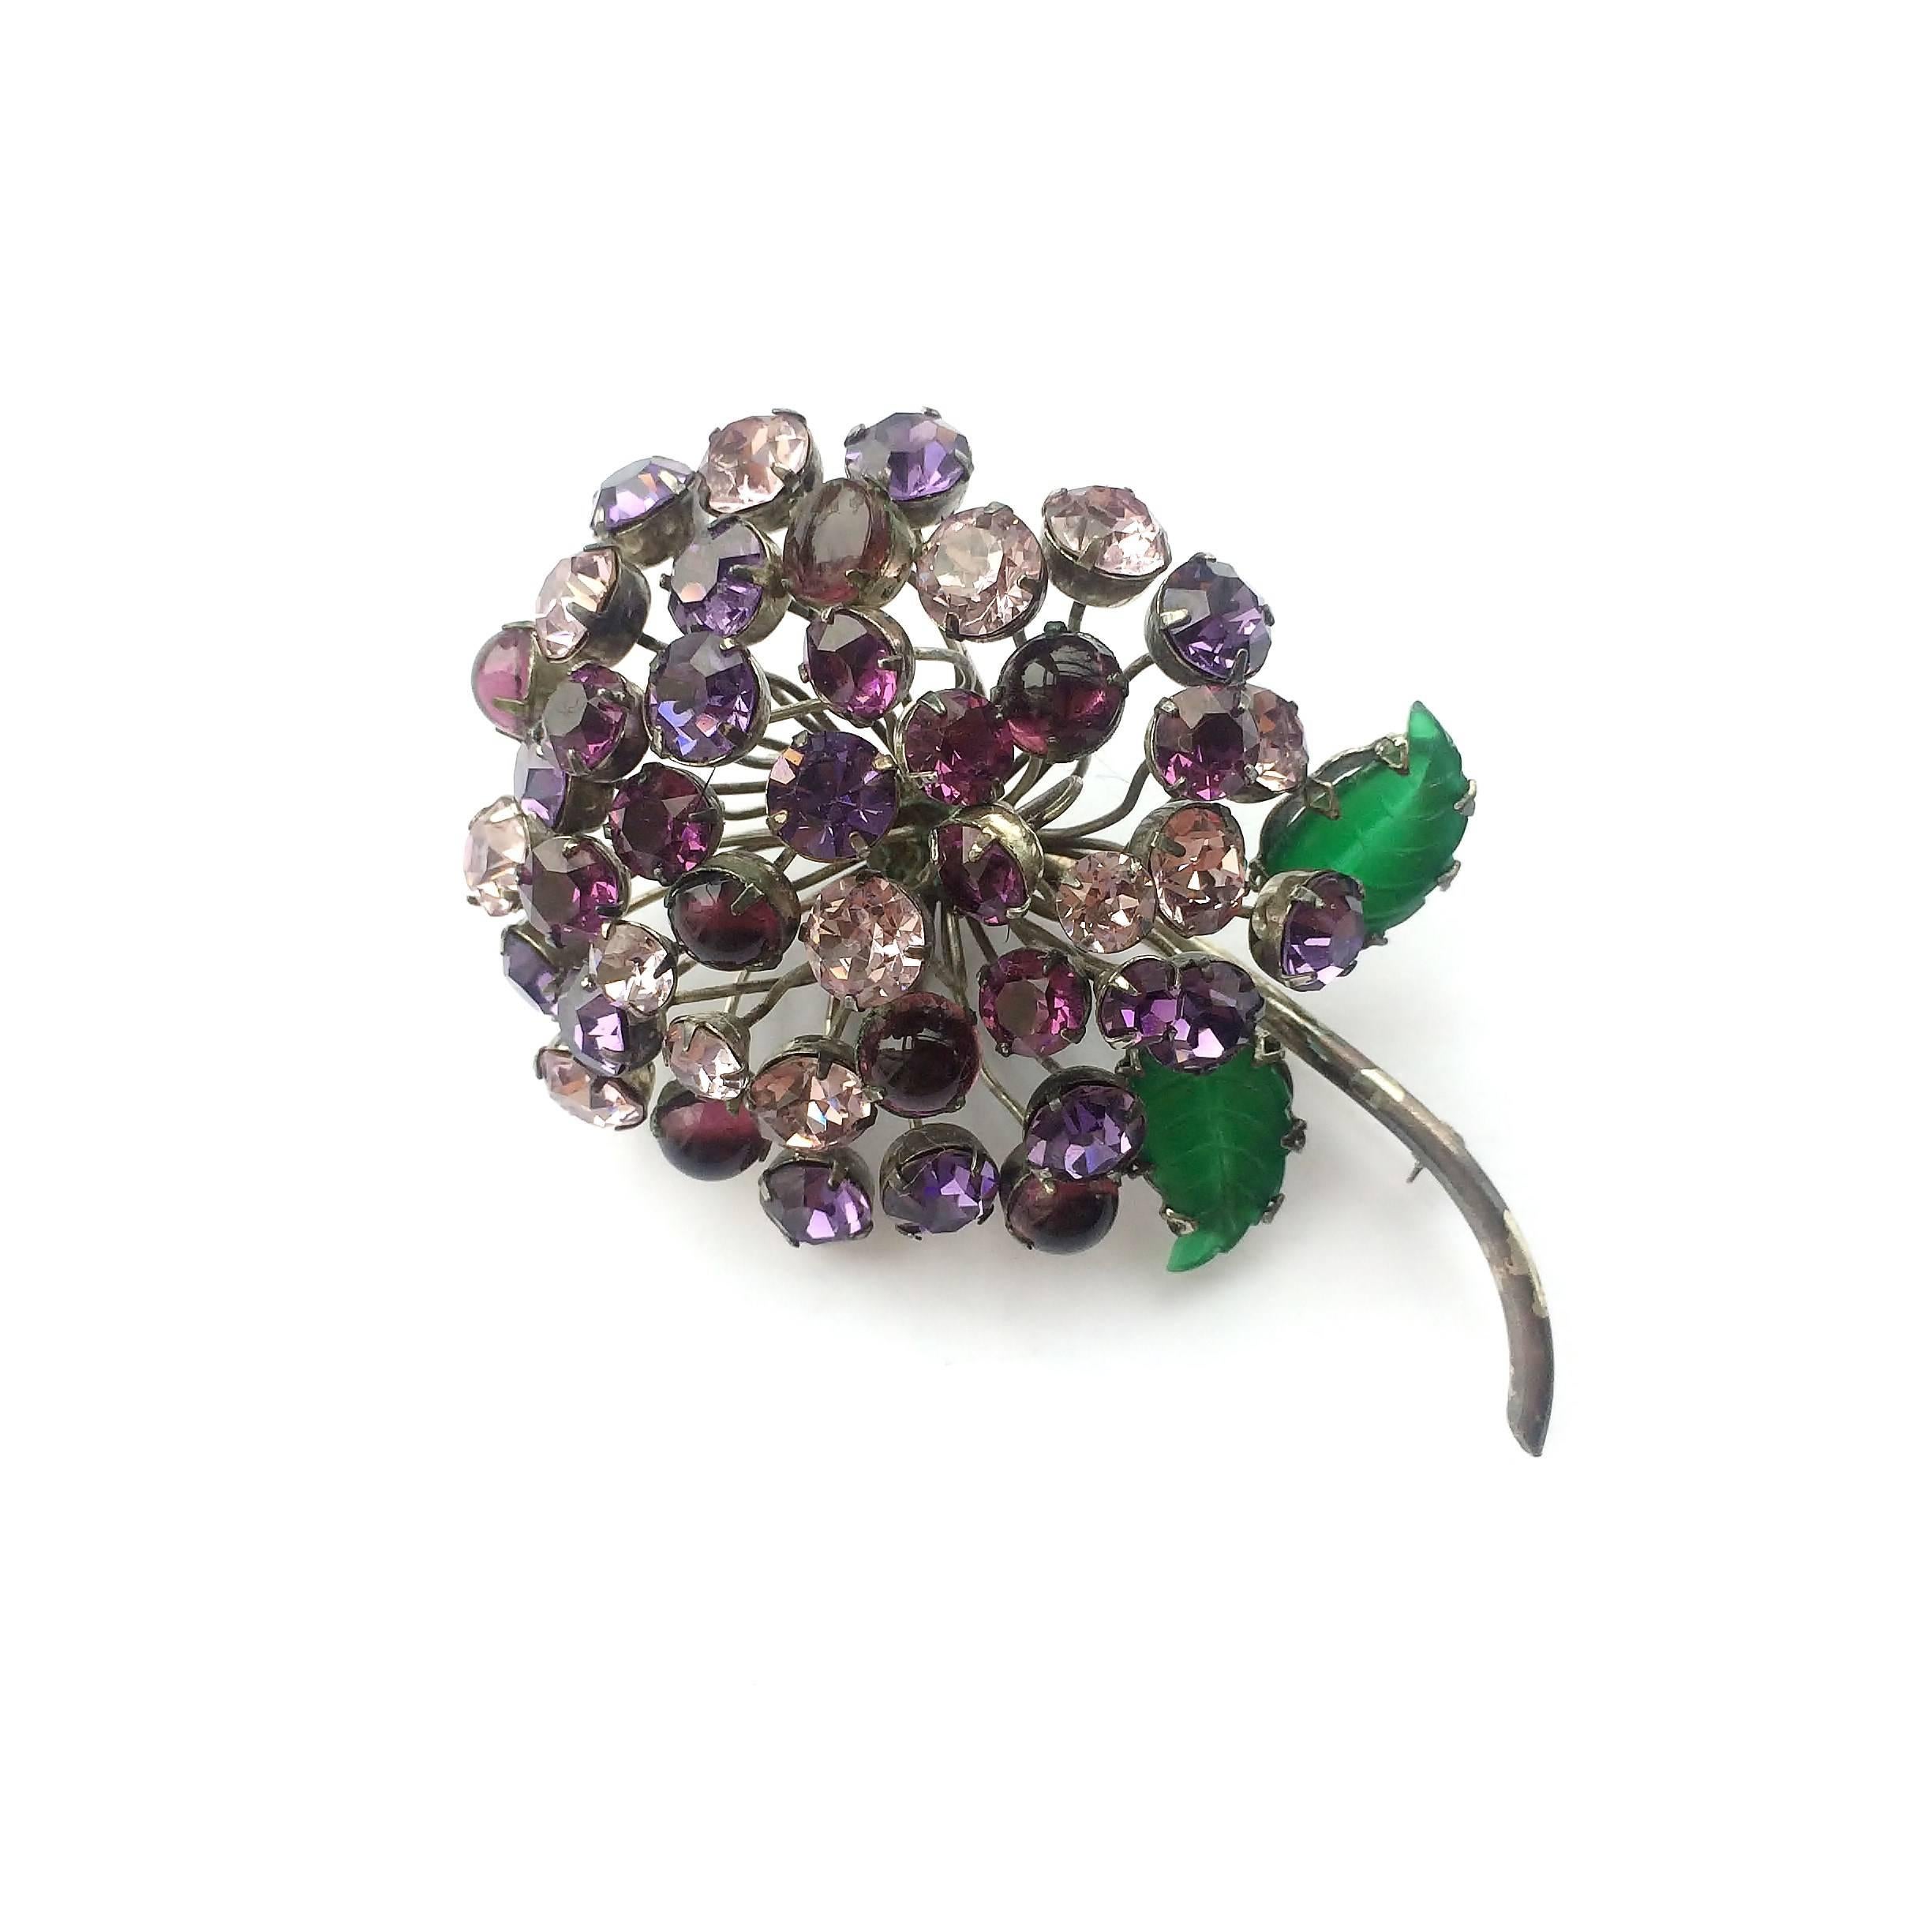 An exceptionally beautiful brooch in the form of a fully blown flowerhead by CIS, very typical, and with a ravishing colour combination. Though unsigned, this is undoubtedly CIS, displaying all her chararcteristics.With pressed glass 'leaves' and